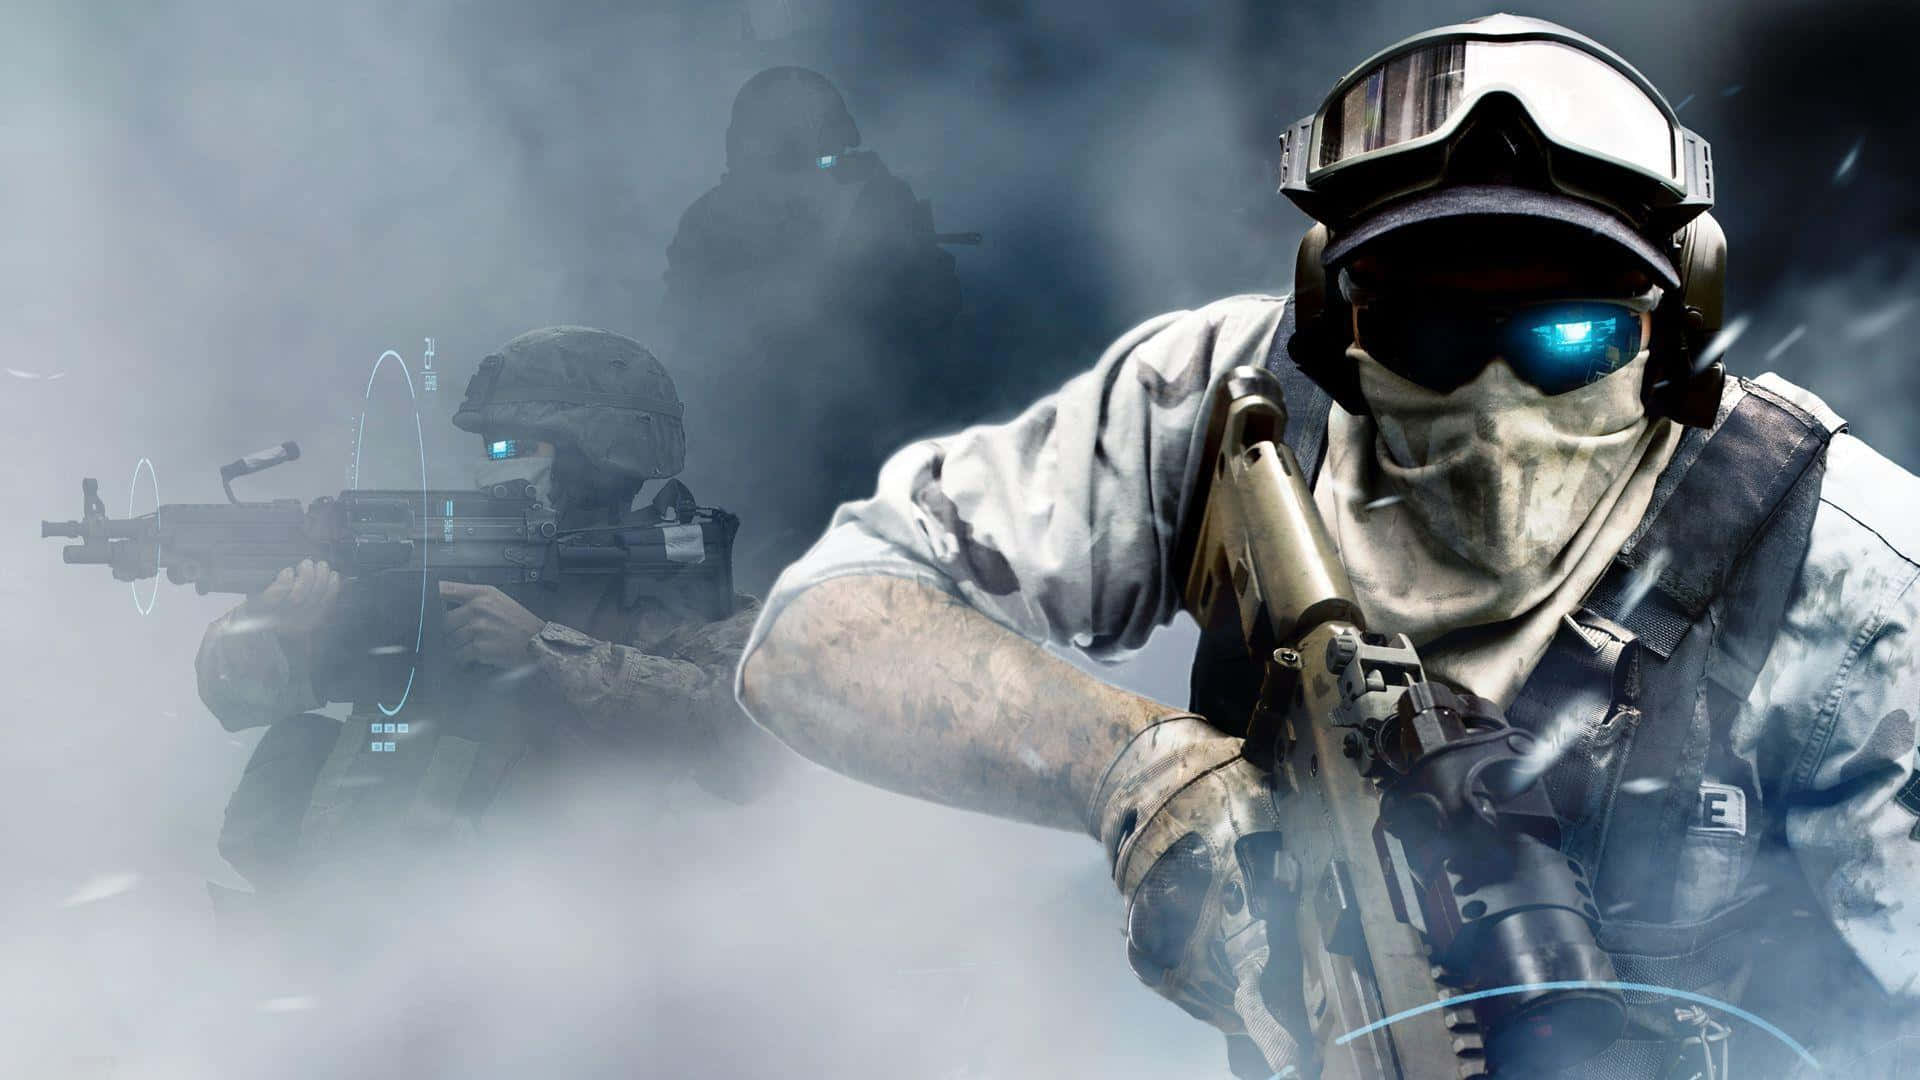 Get Ready to Take Aim and Battle Your Buddies with this Exciting First-Person Shooter Wallpaper